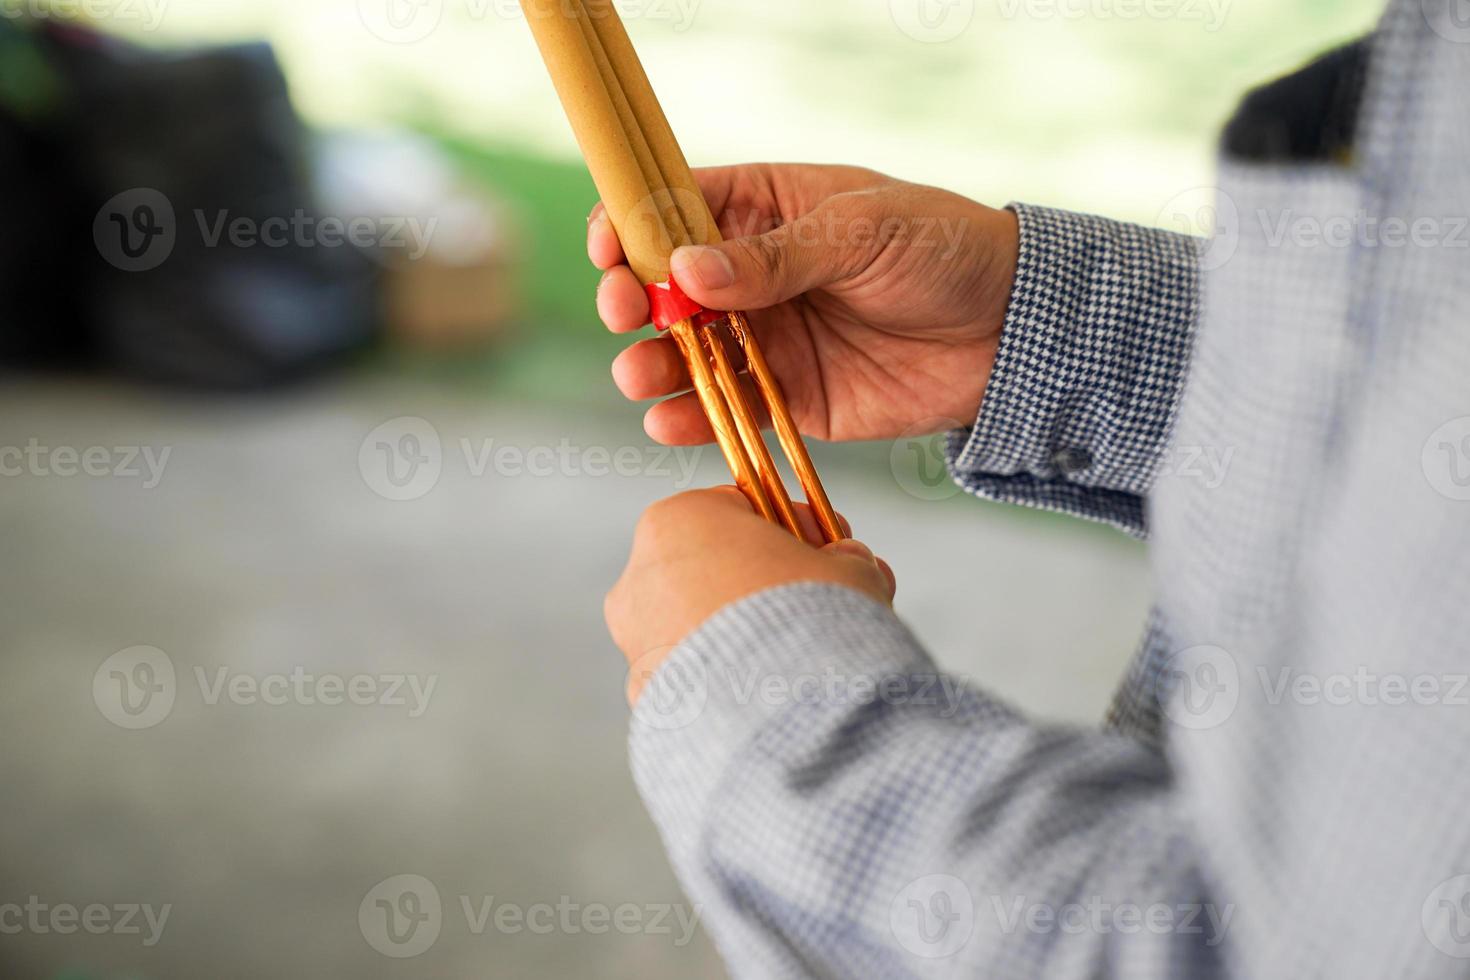 incense and food photo